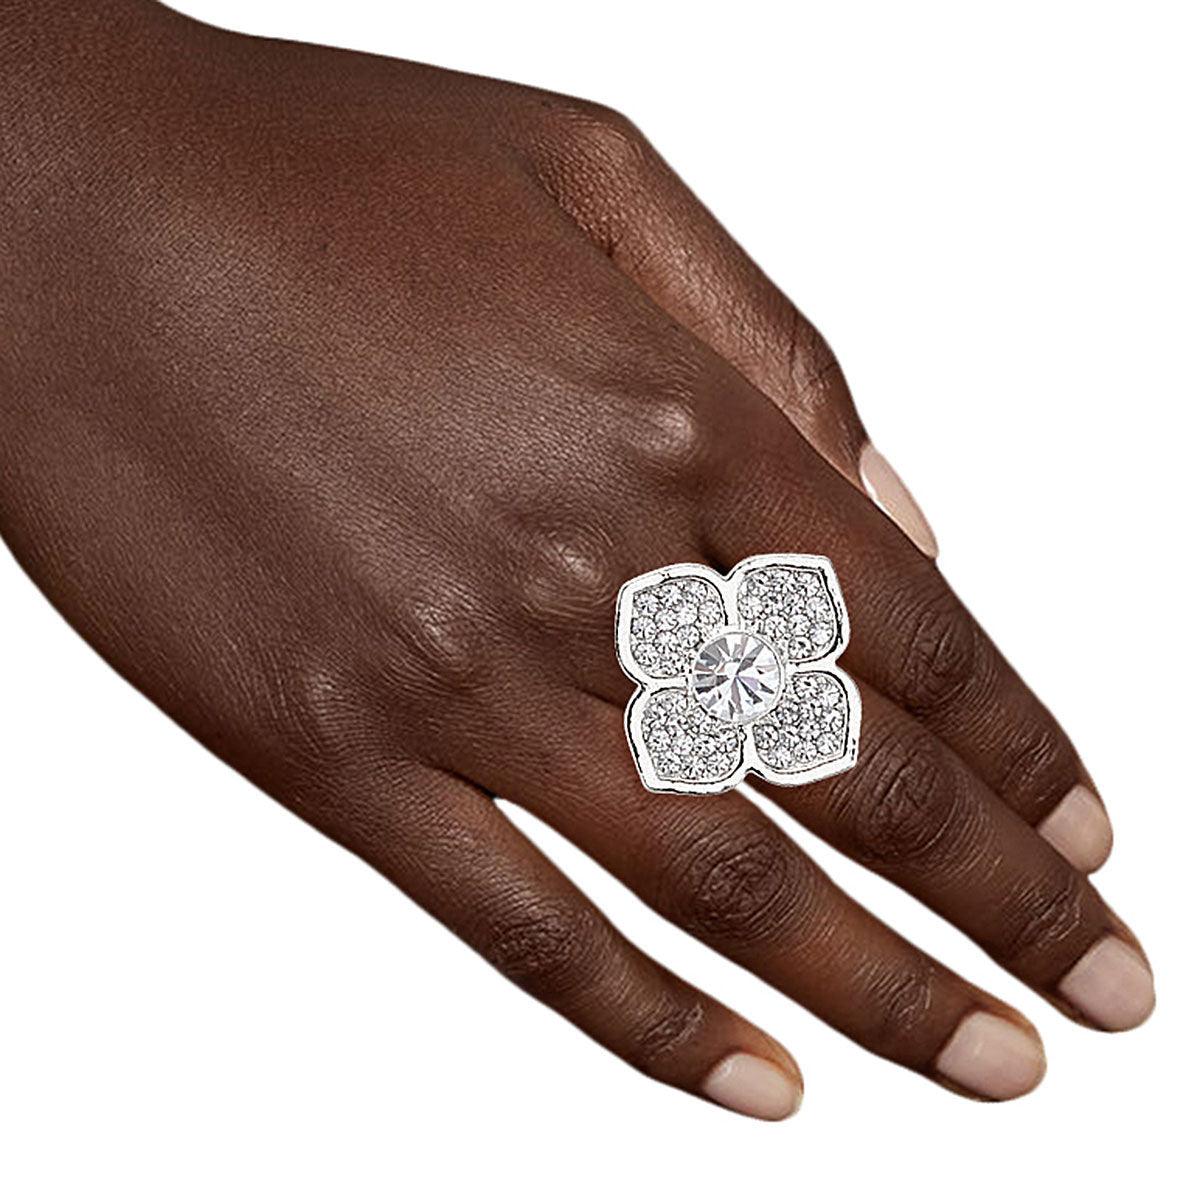 Shimmer and Shine: Silver Flower Ring with Clear Rhinestones - Fashion Jewelry